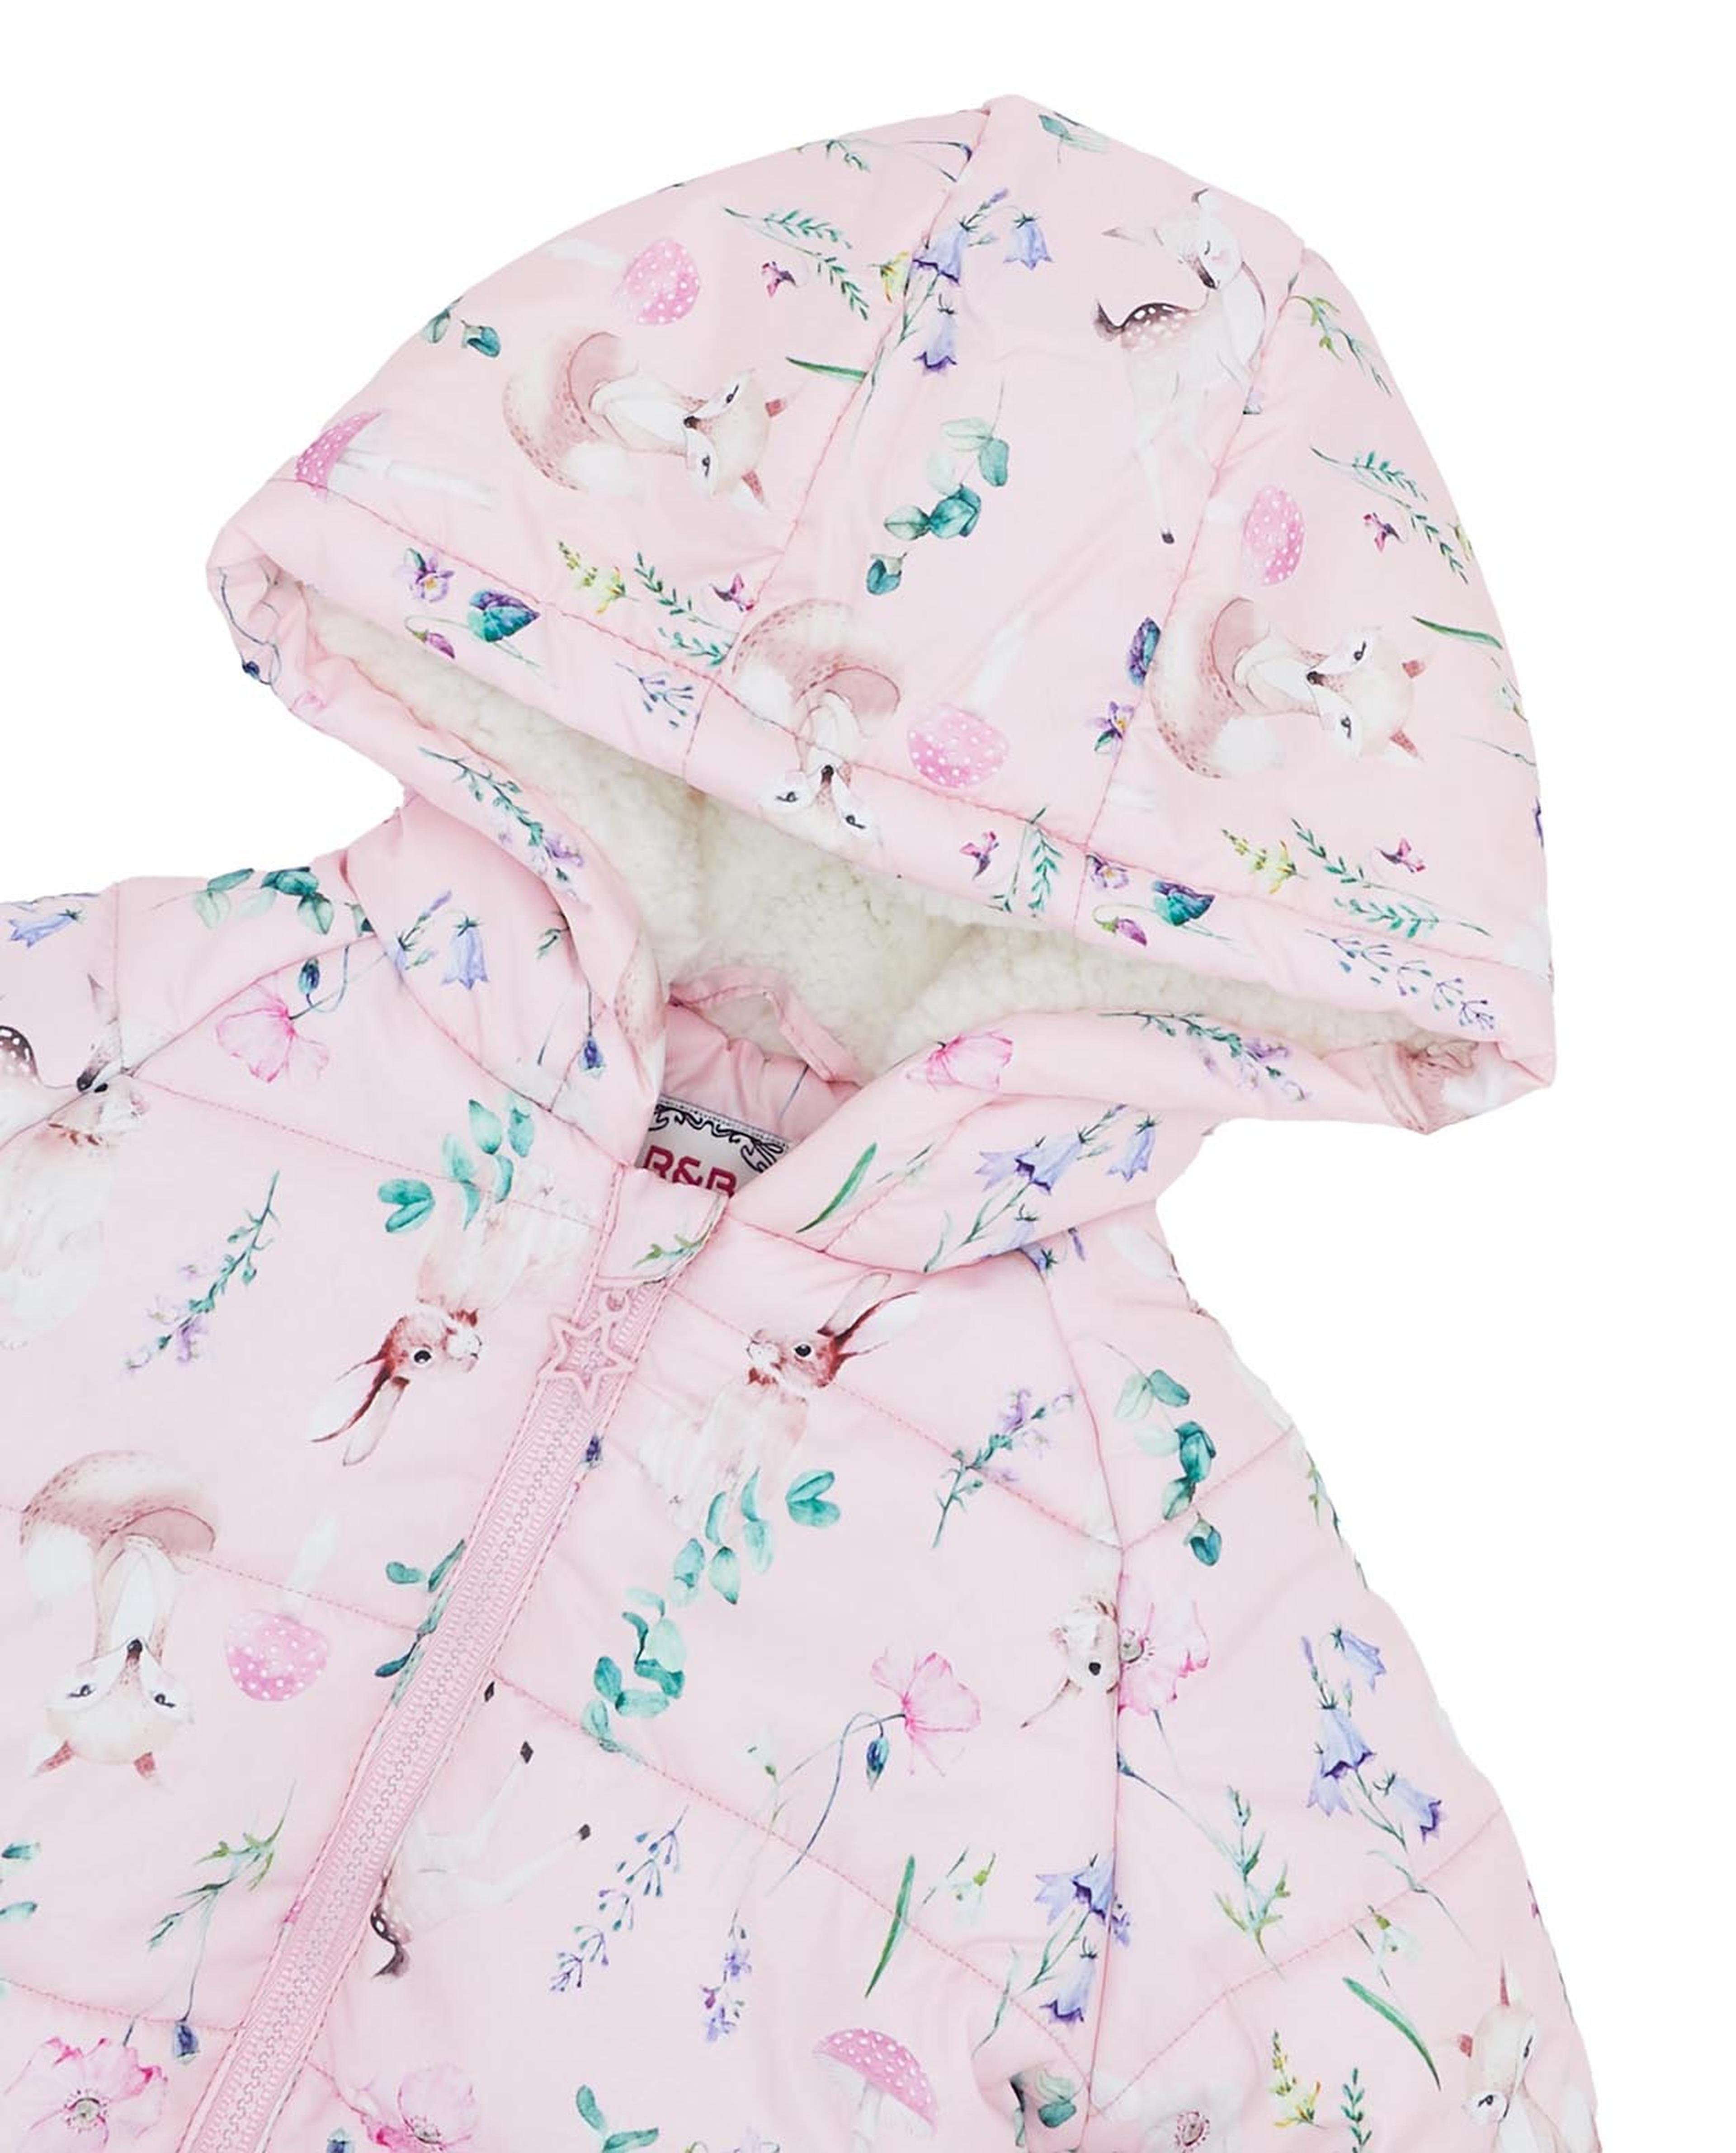 Floral Print Hooded Jacket with Zipper Closure